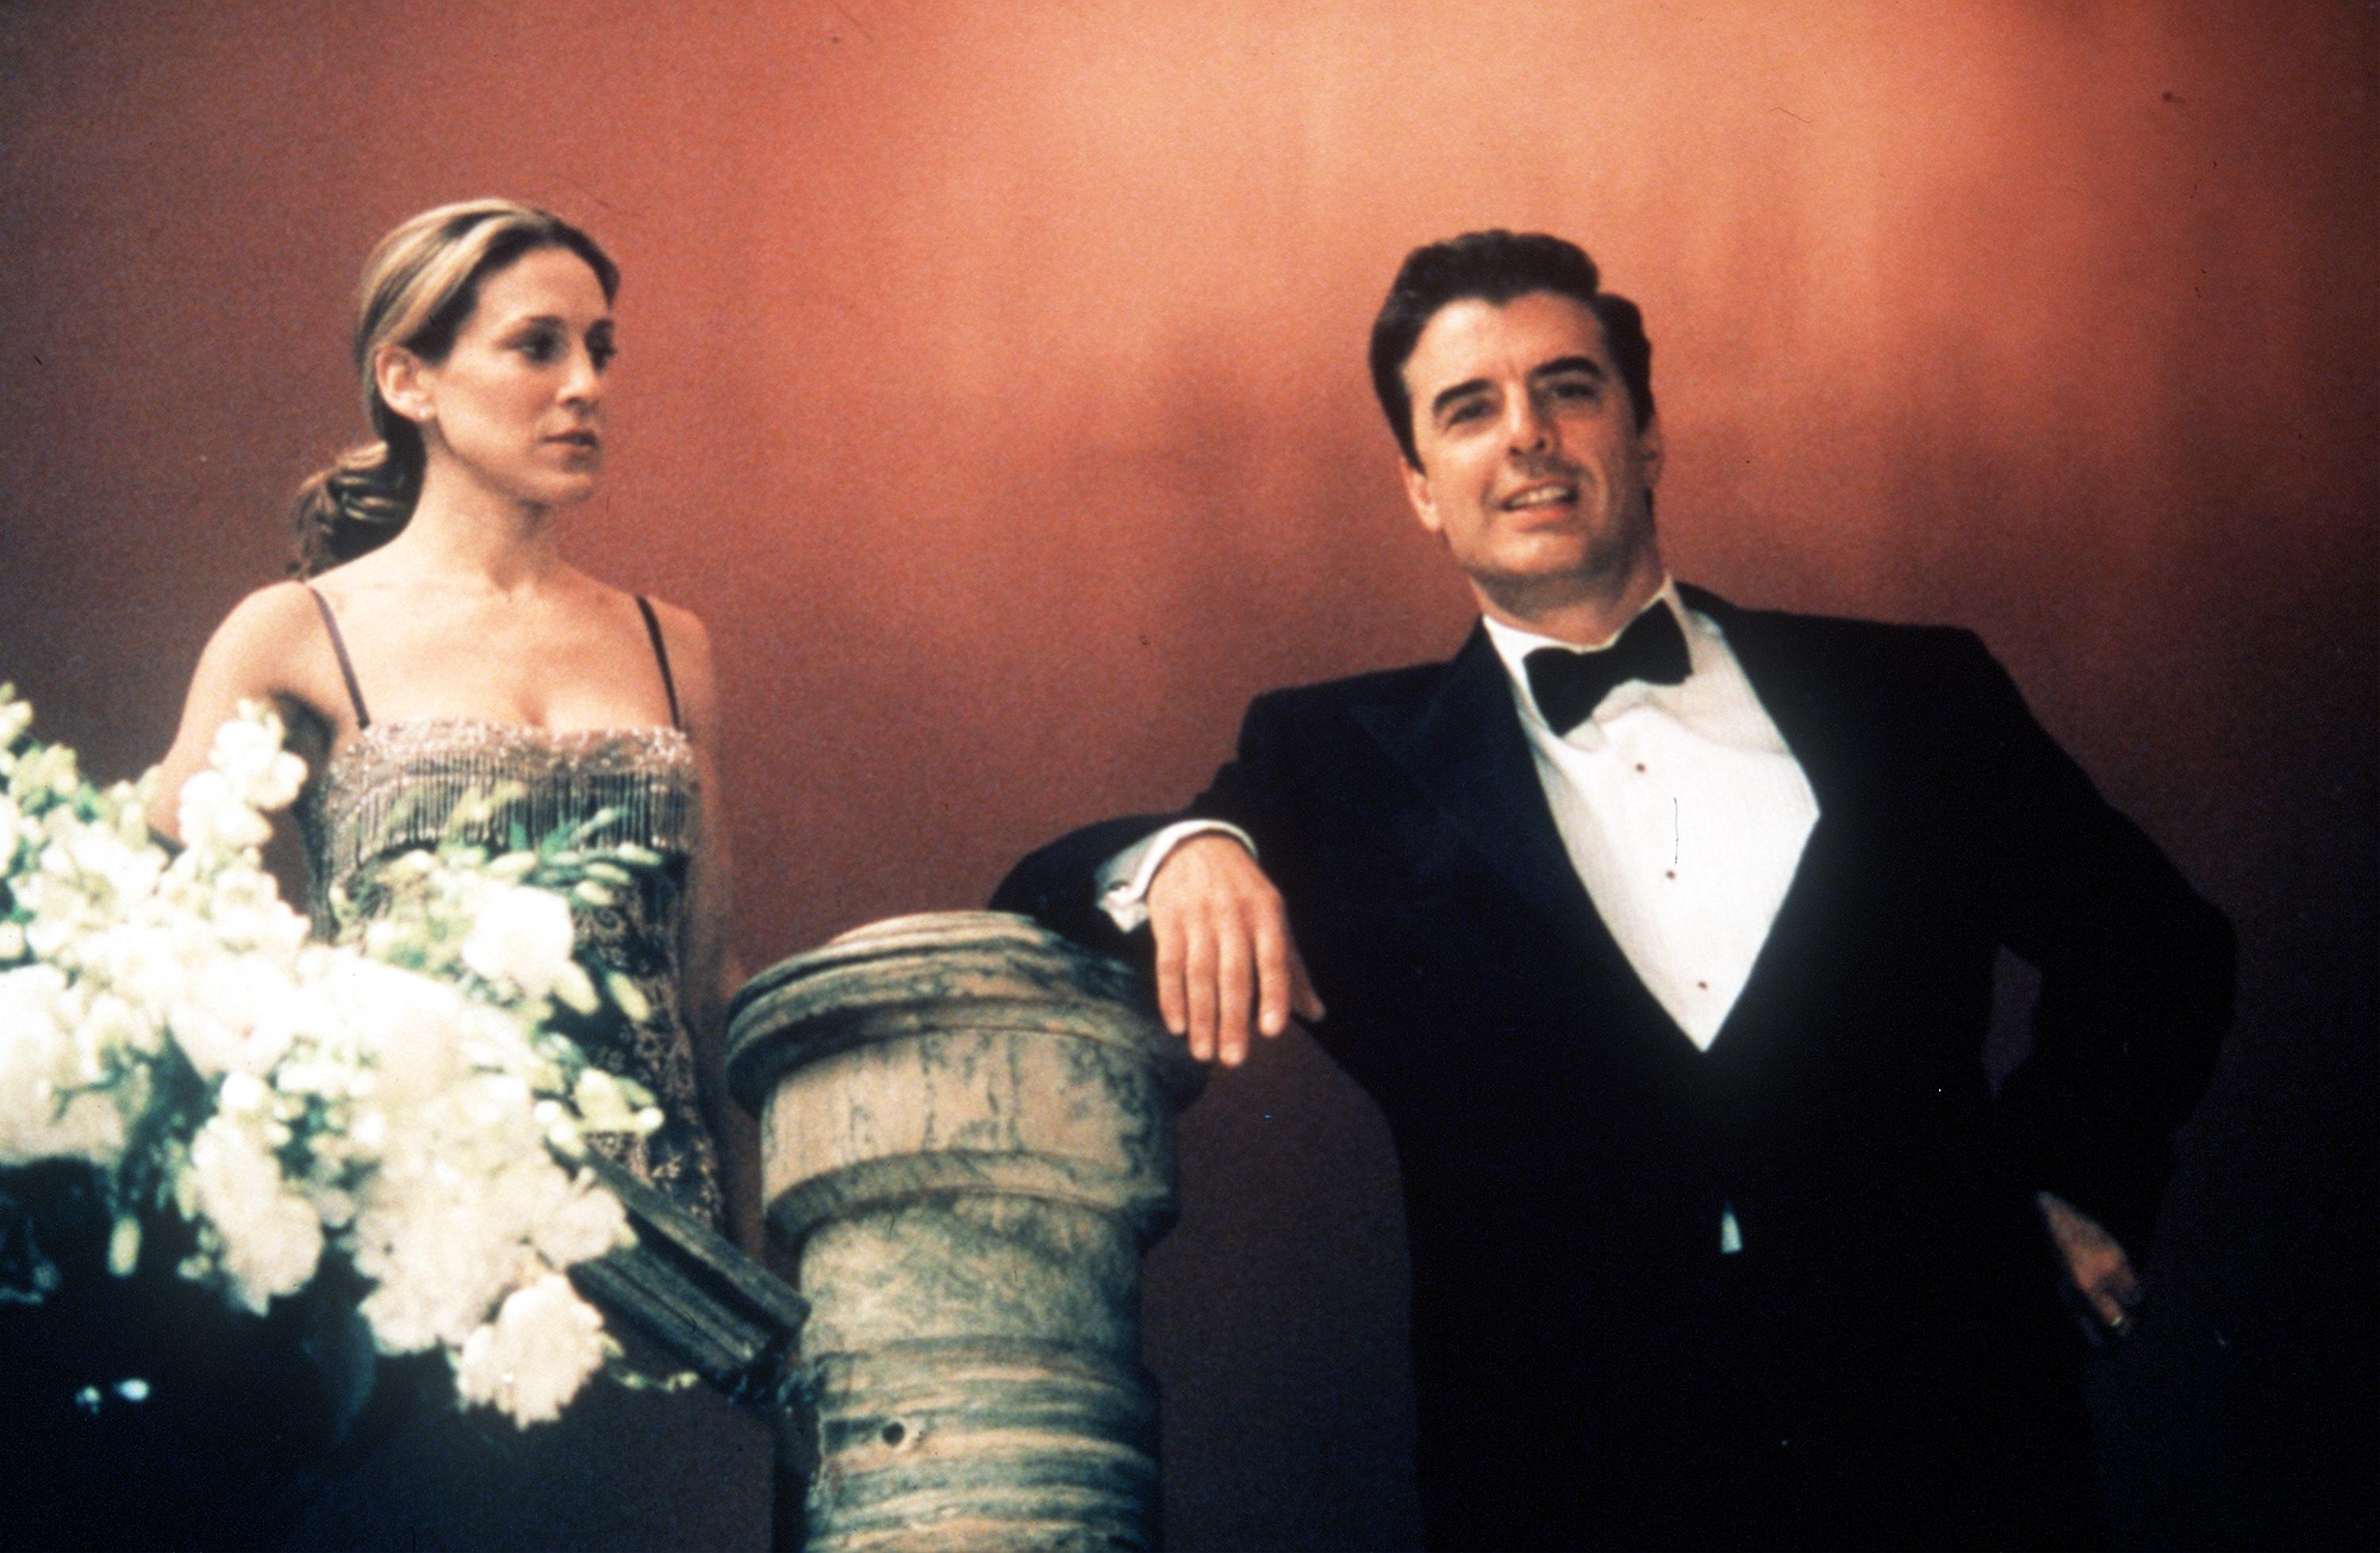 Sarah Jessica Parker as Carrie Bradshaw and Chris Noth as Mr. Big